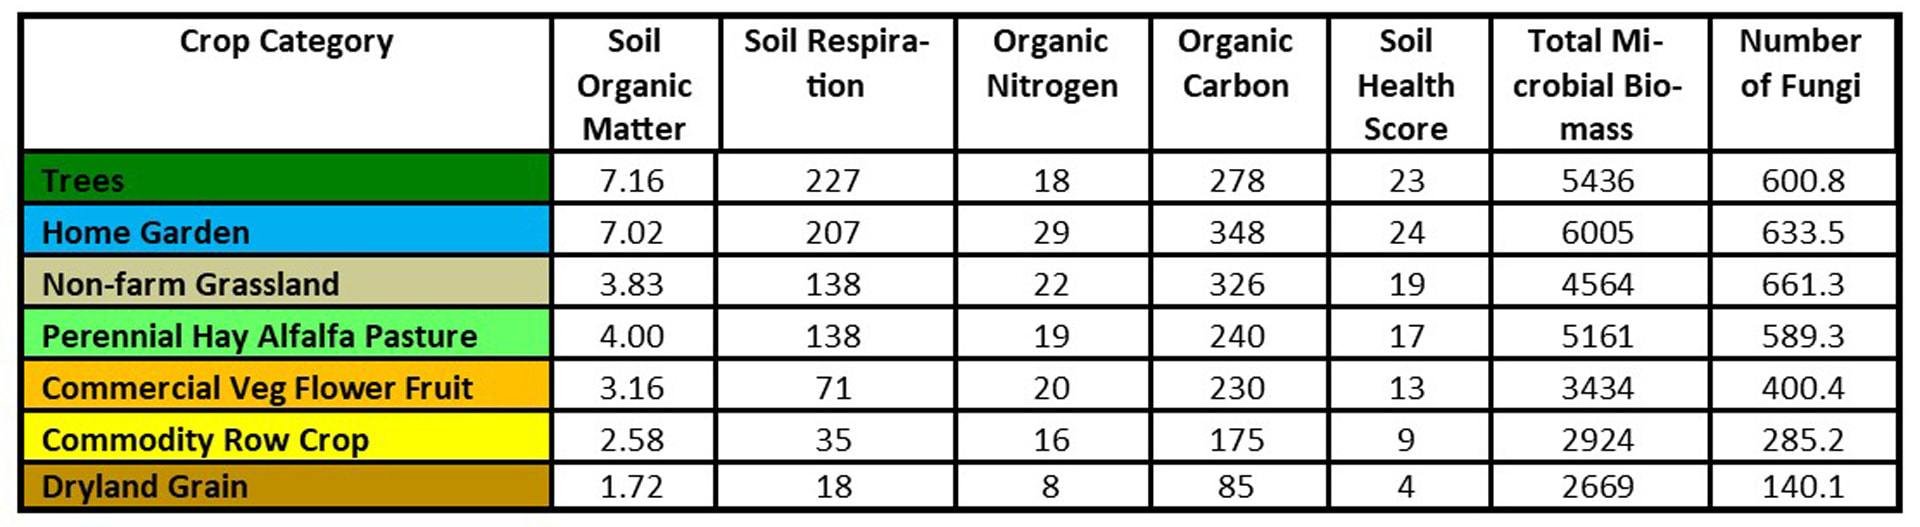 Predicting the Soil Health of 7 Different Crop Groups: PART 2